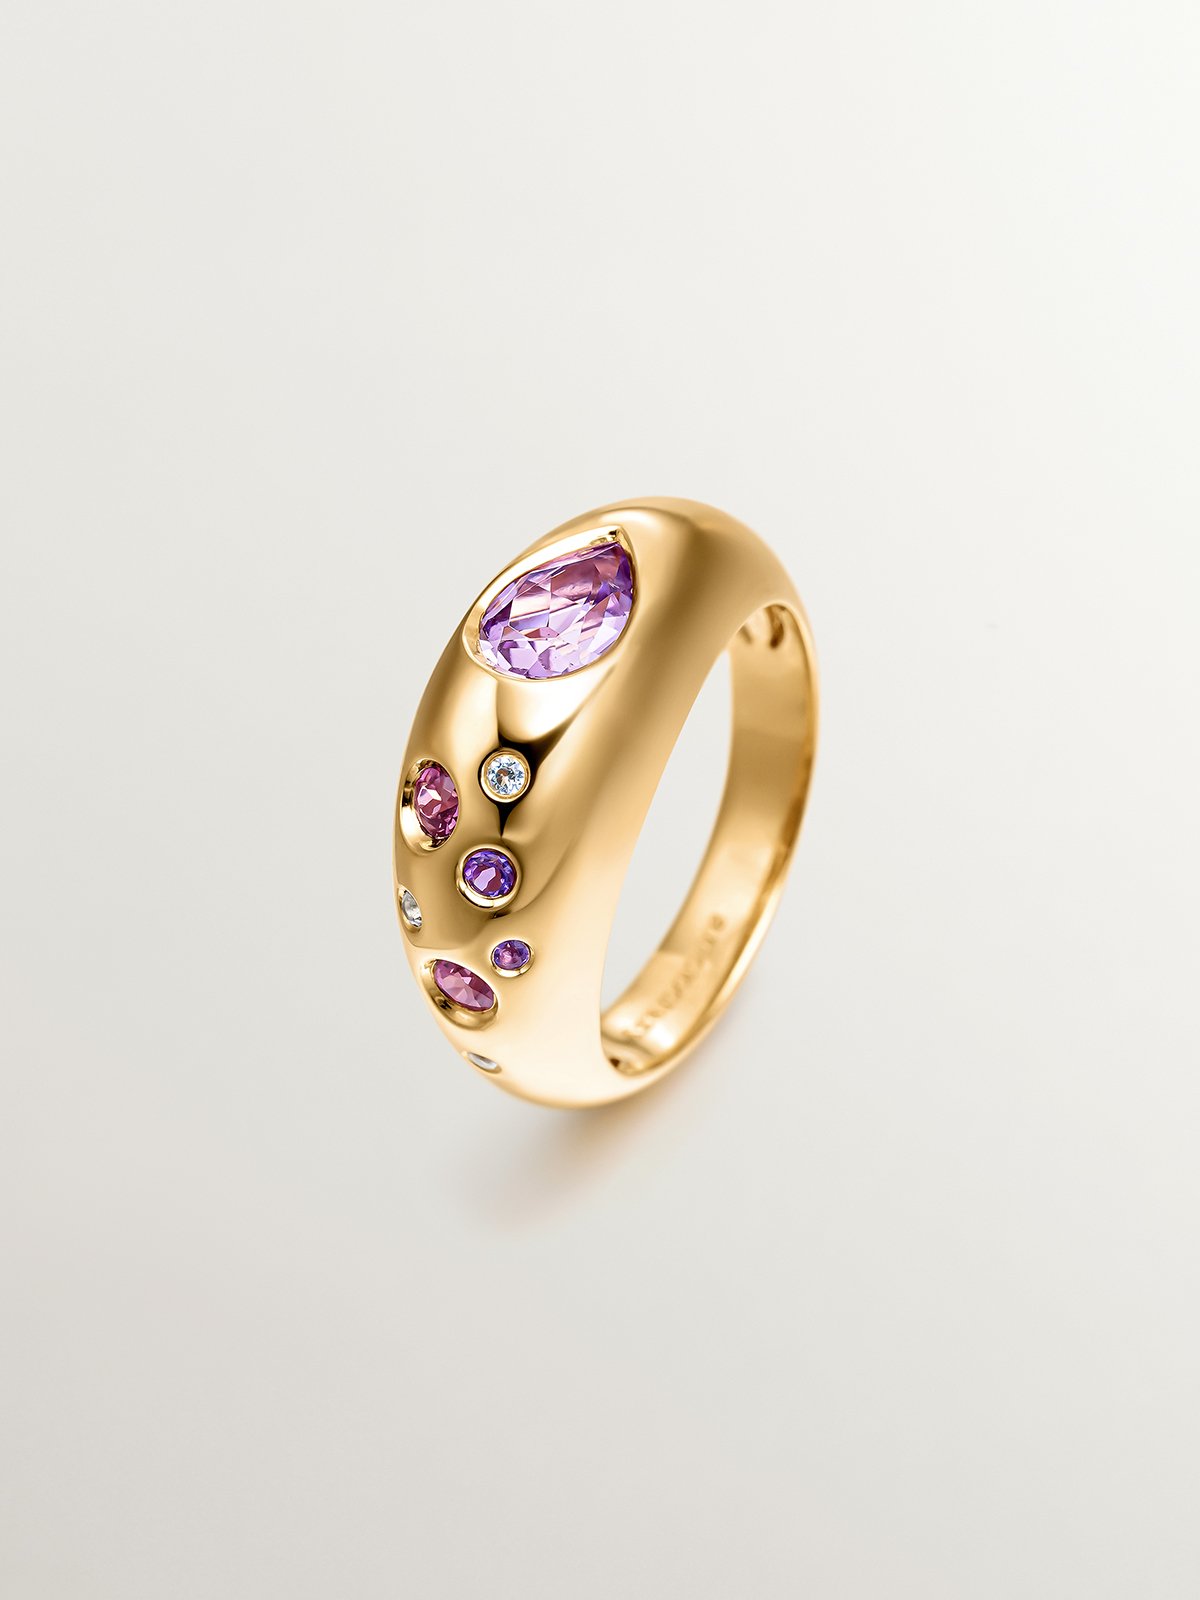 18K yellow gold plated 925 silver ring with pink and purple amethysts, white topaz and pink rhodolites